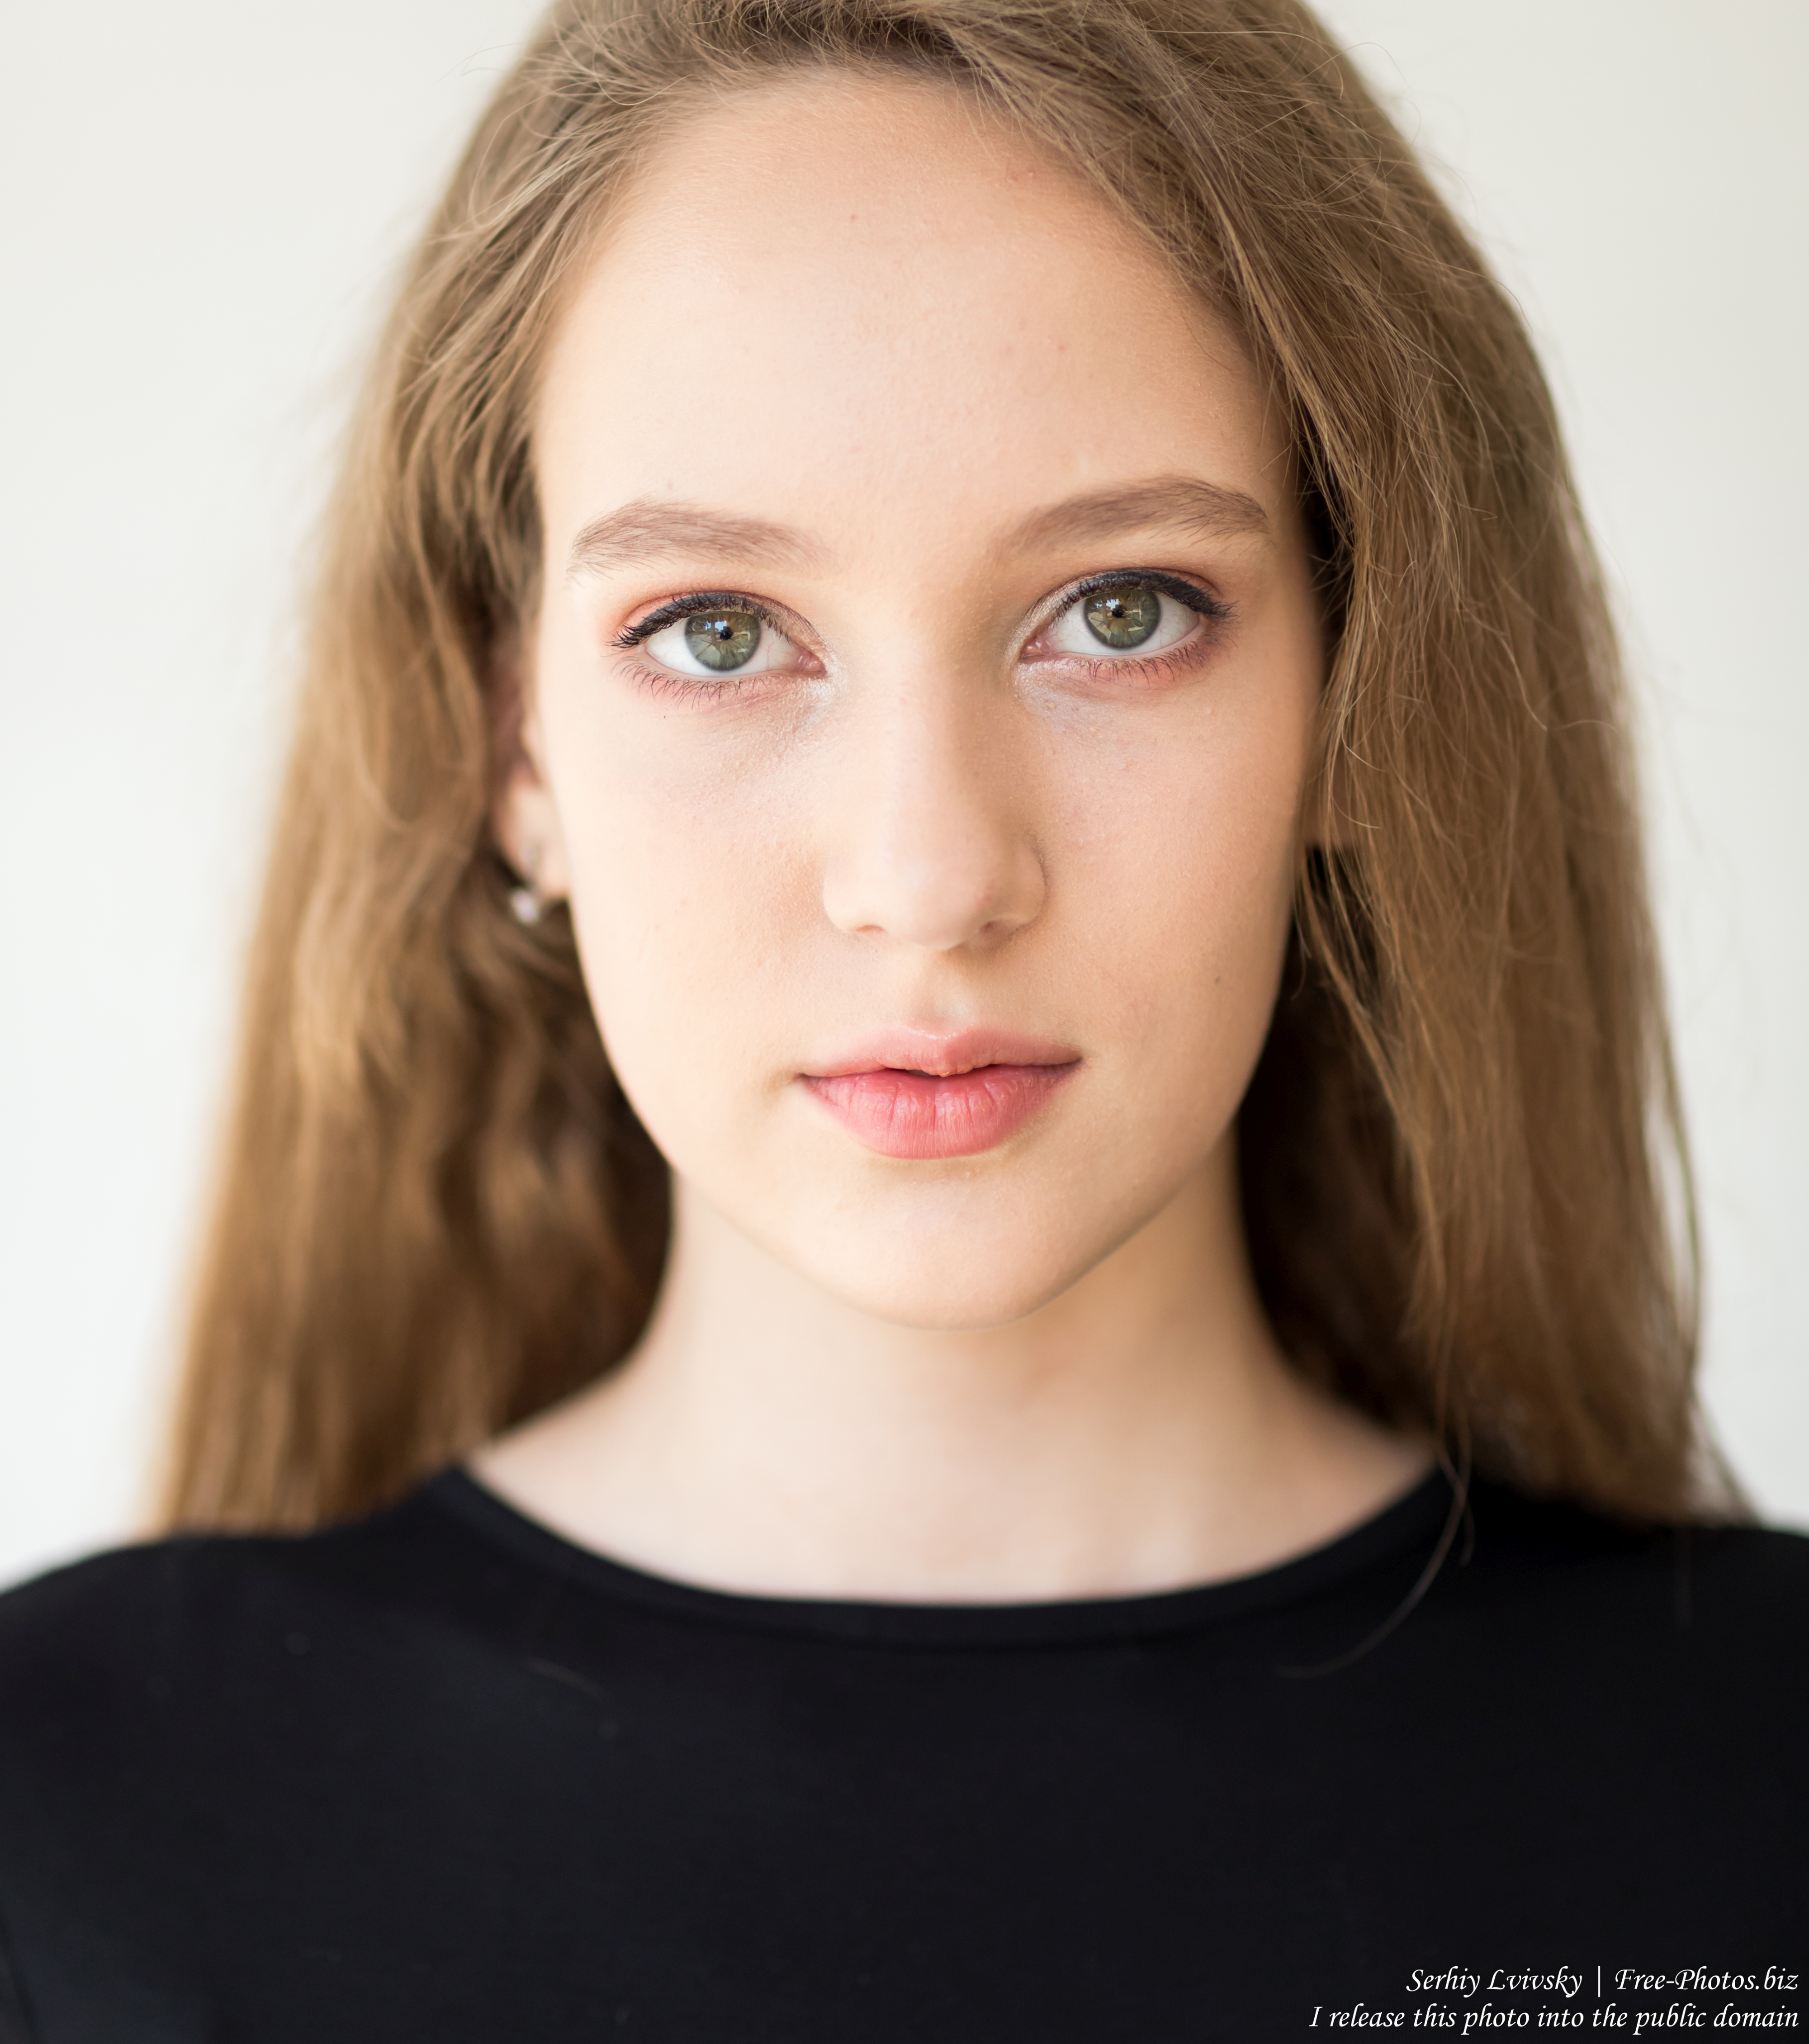 nastia_a_16-year-old_girl_with_natural_fair_hair_photographed_in_june_2019_by_serhiy_lvivsky_02